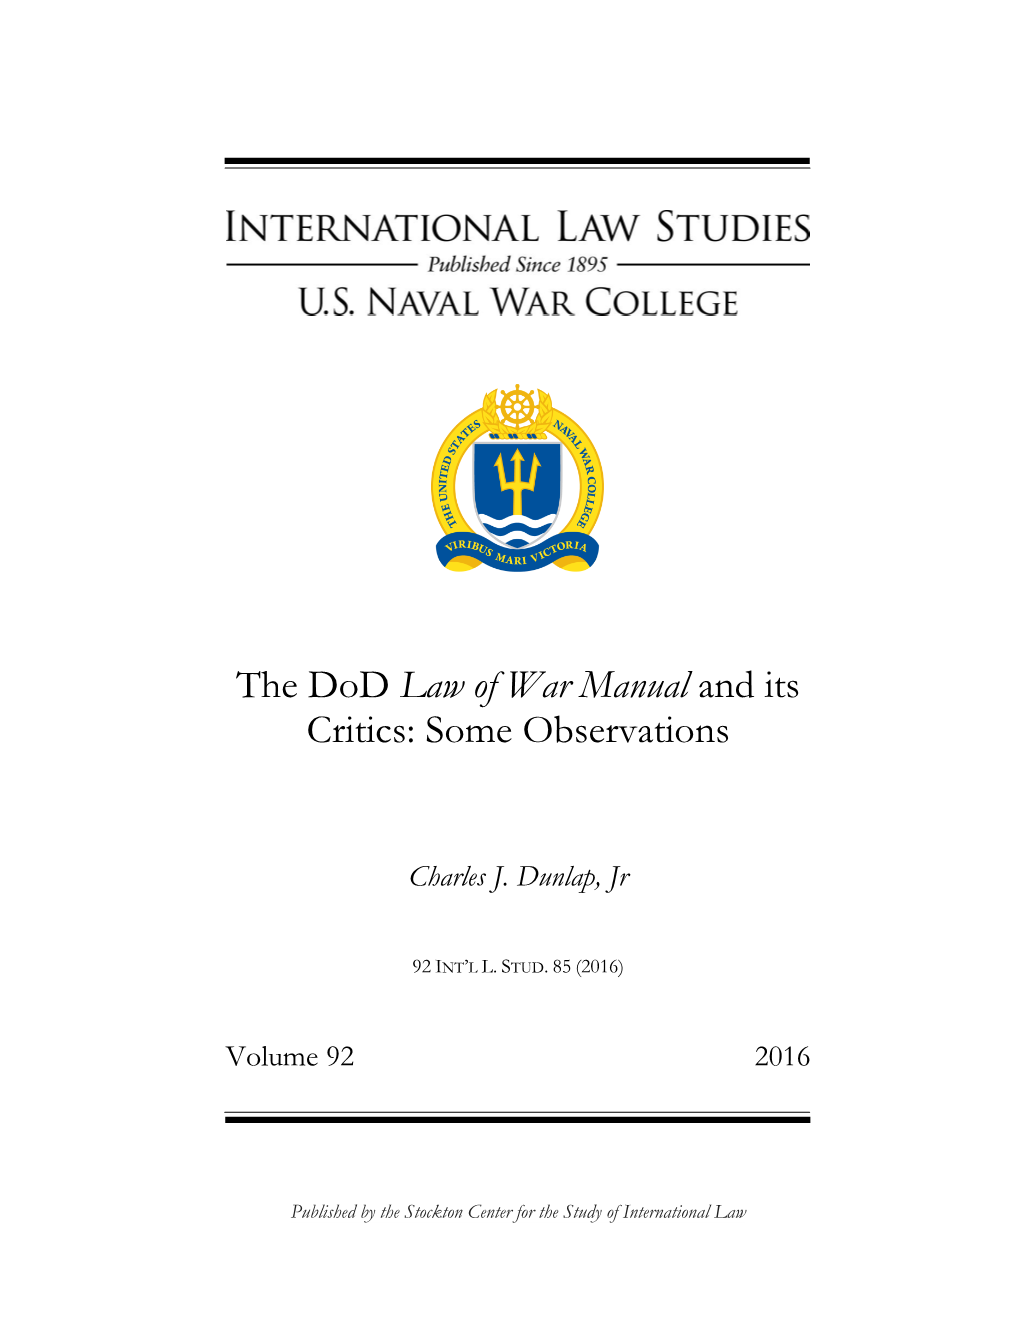 The Dod Law of War Manual and Its Critics: Some Observations